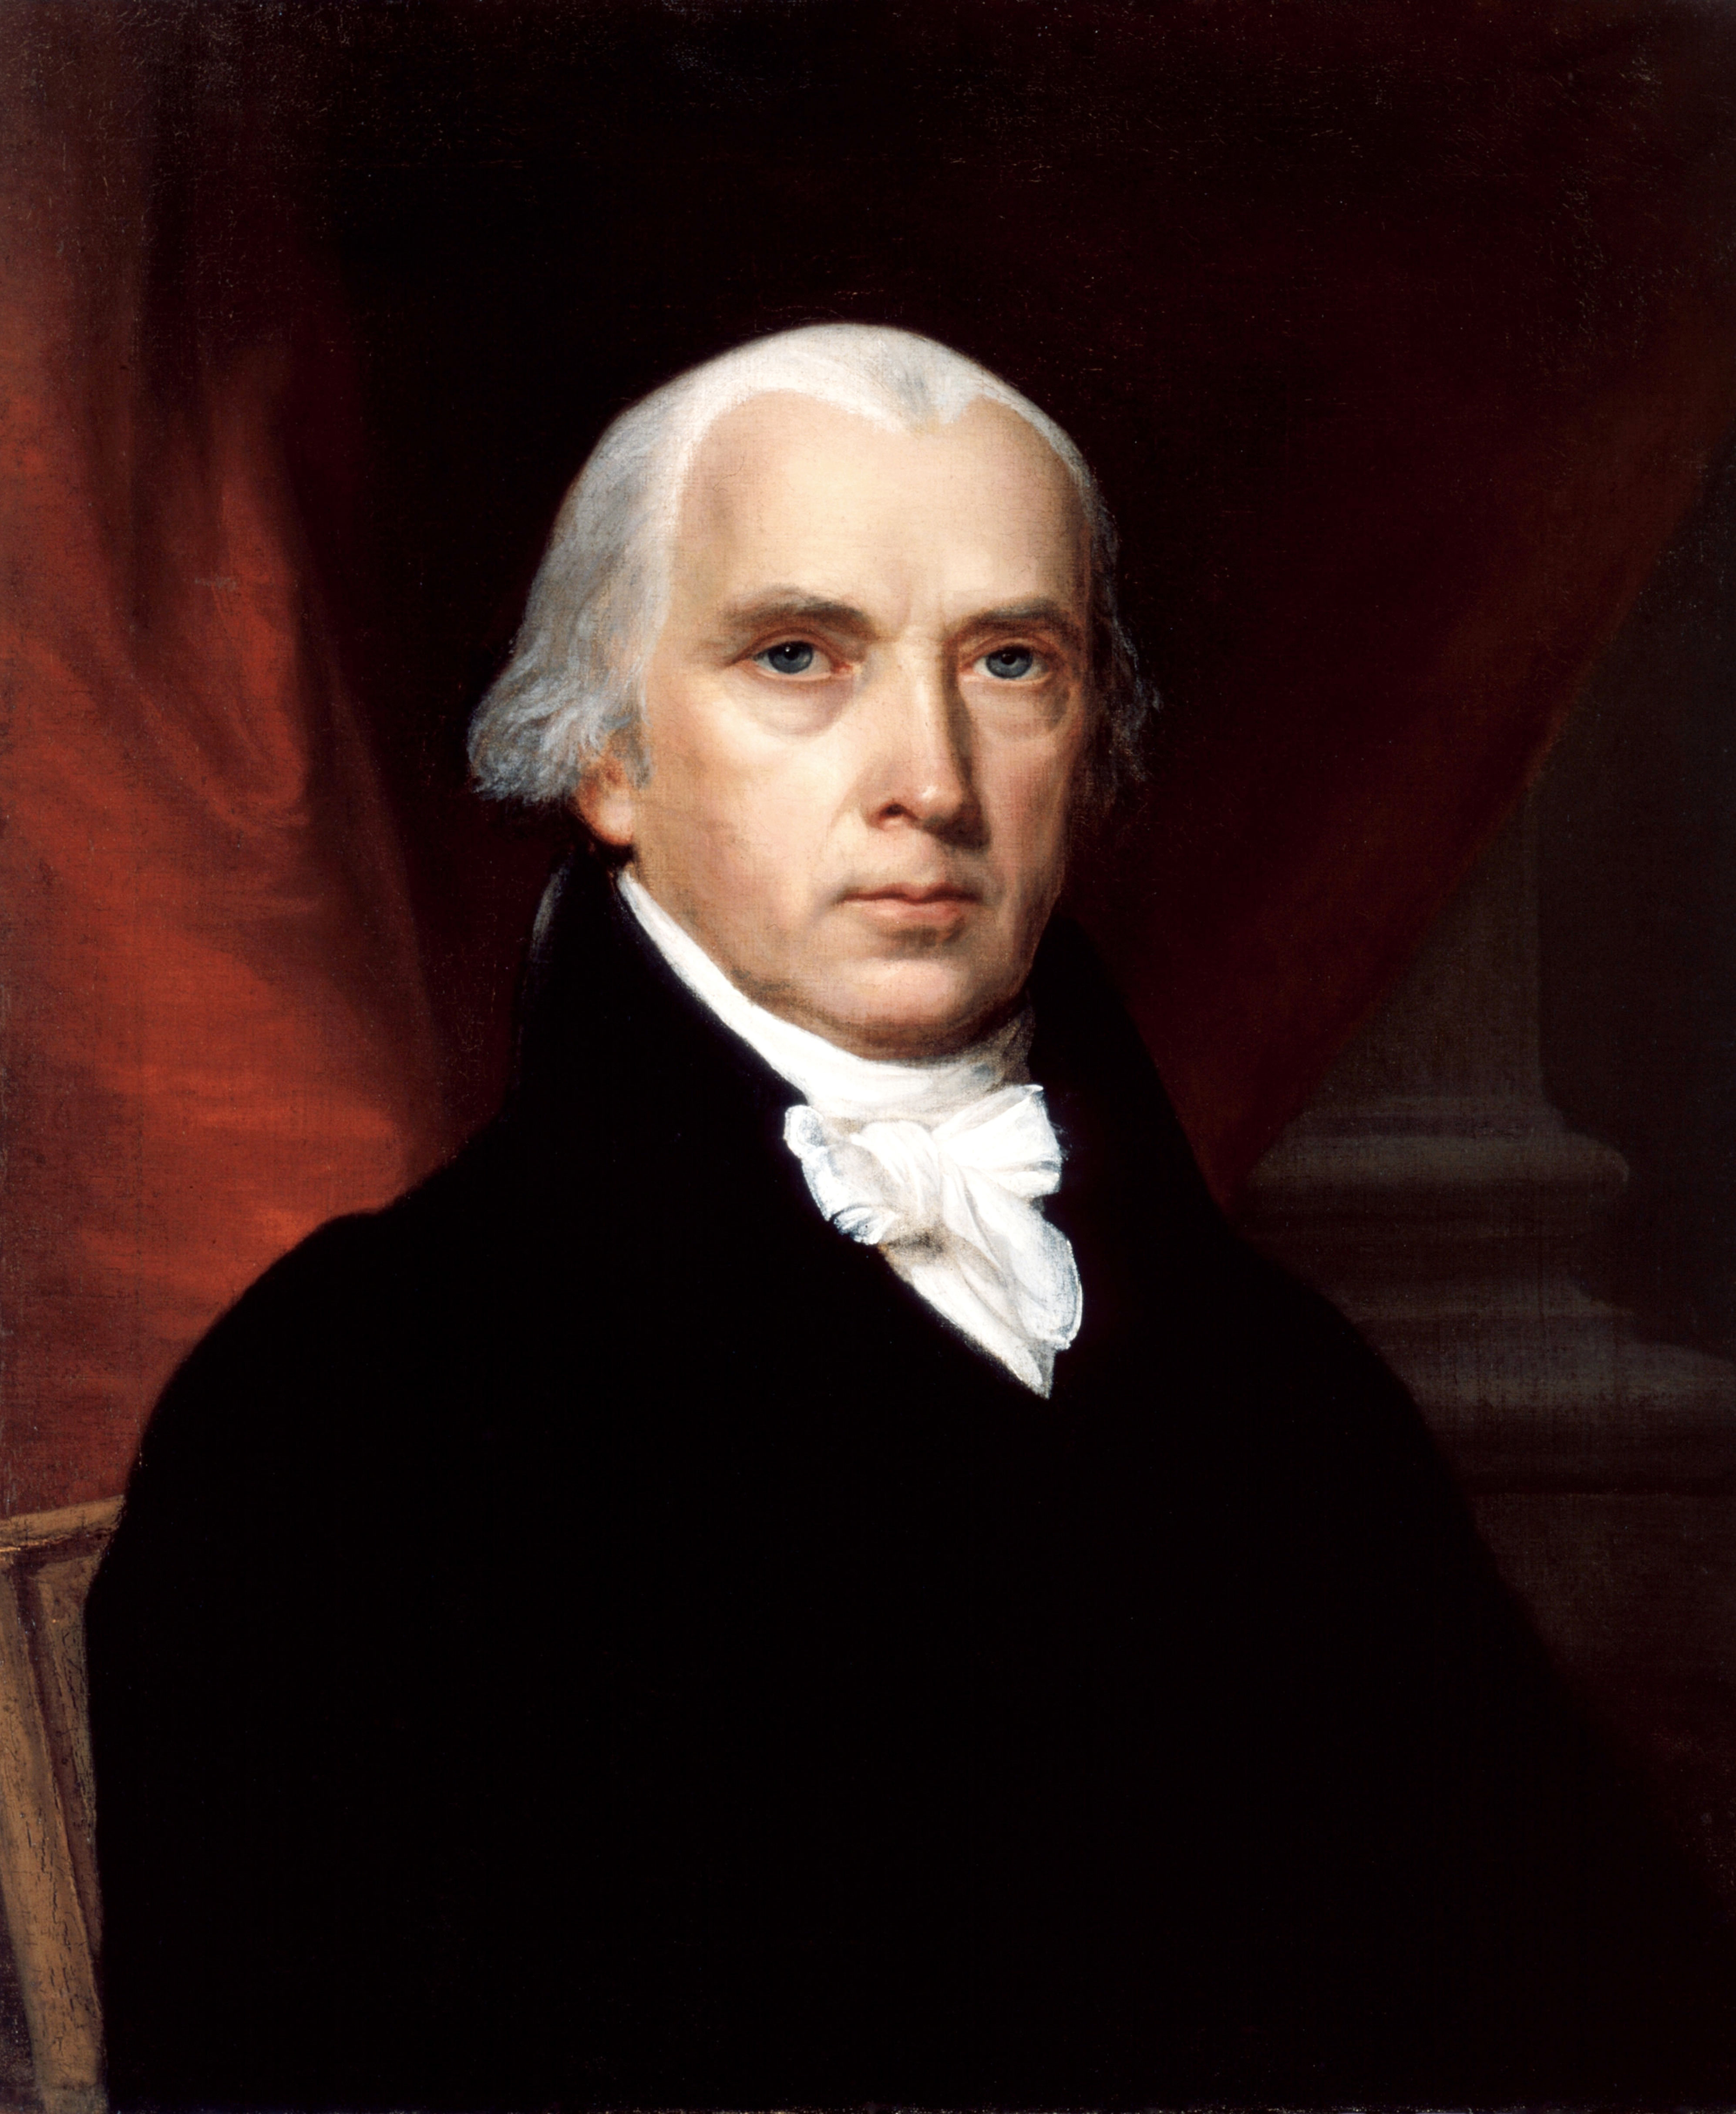 James Madison, a key American founder and author of the U.S. Constitution.